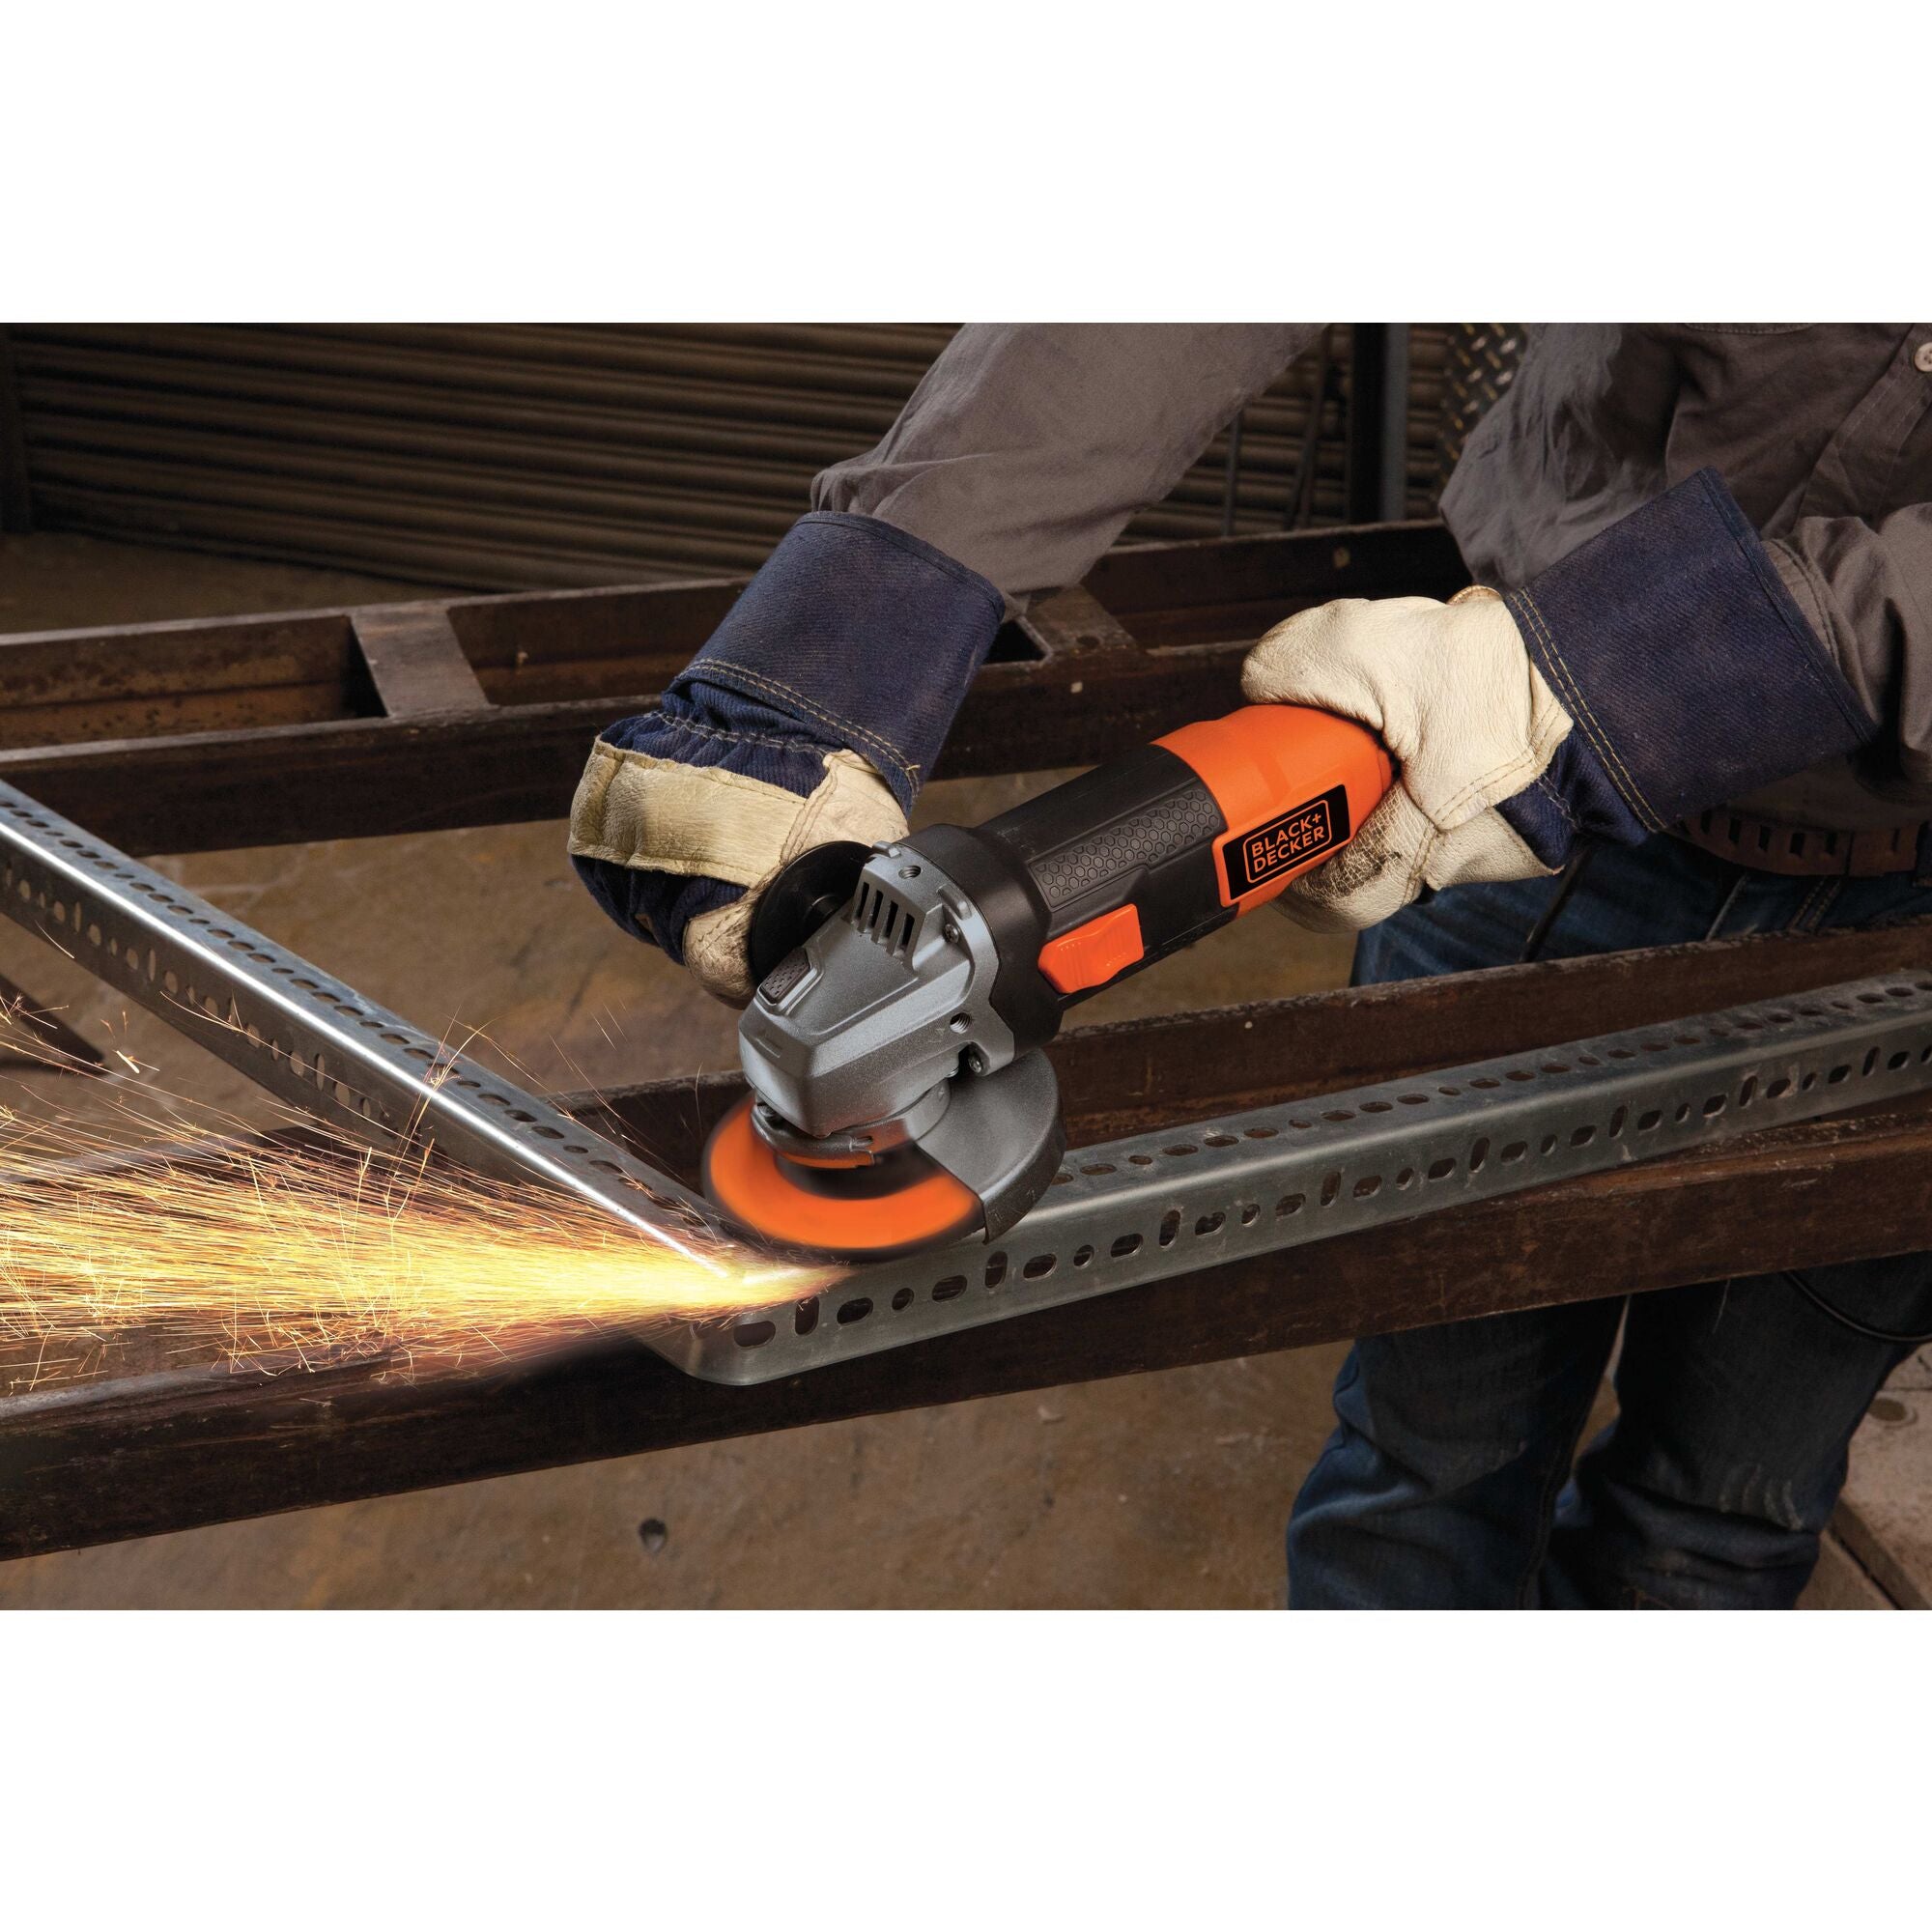 Angle Grinder Tool, 4-1/2-Inch, 6 Amp